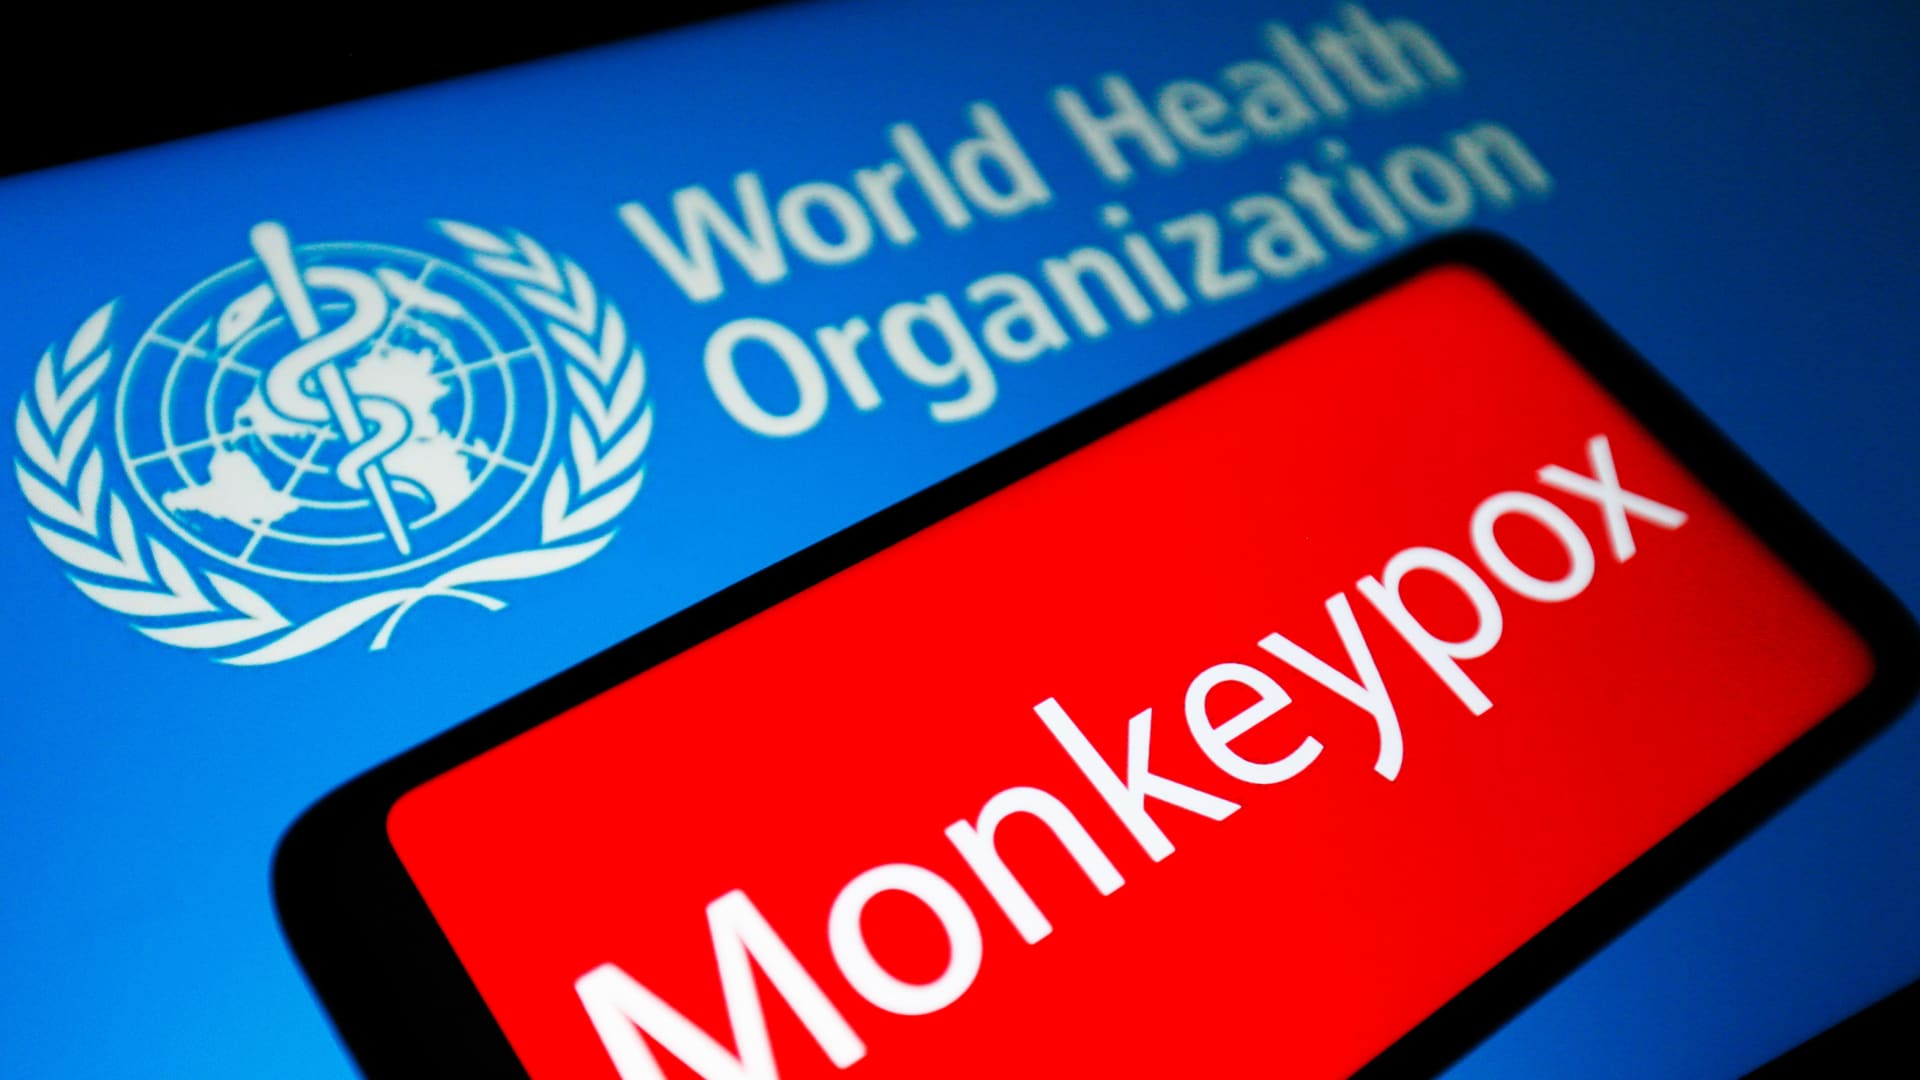 Monkeypox outbreak is primarily spreading through sex, WHO officials say